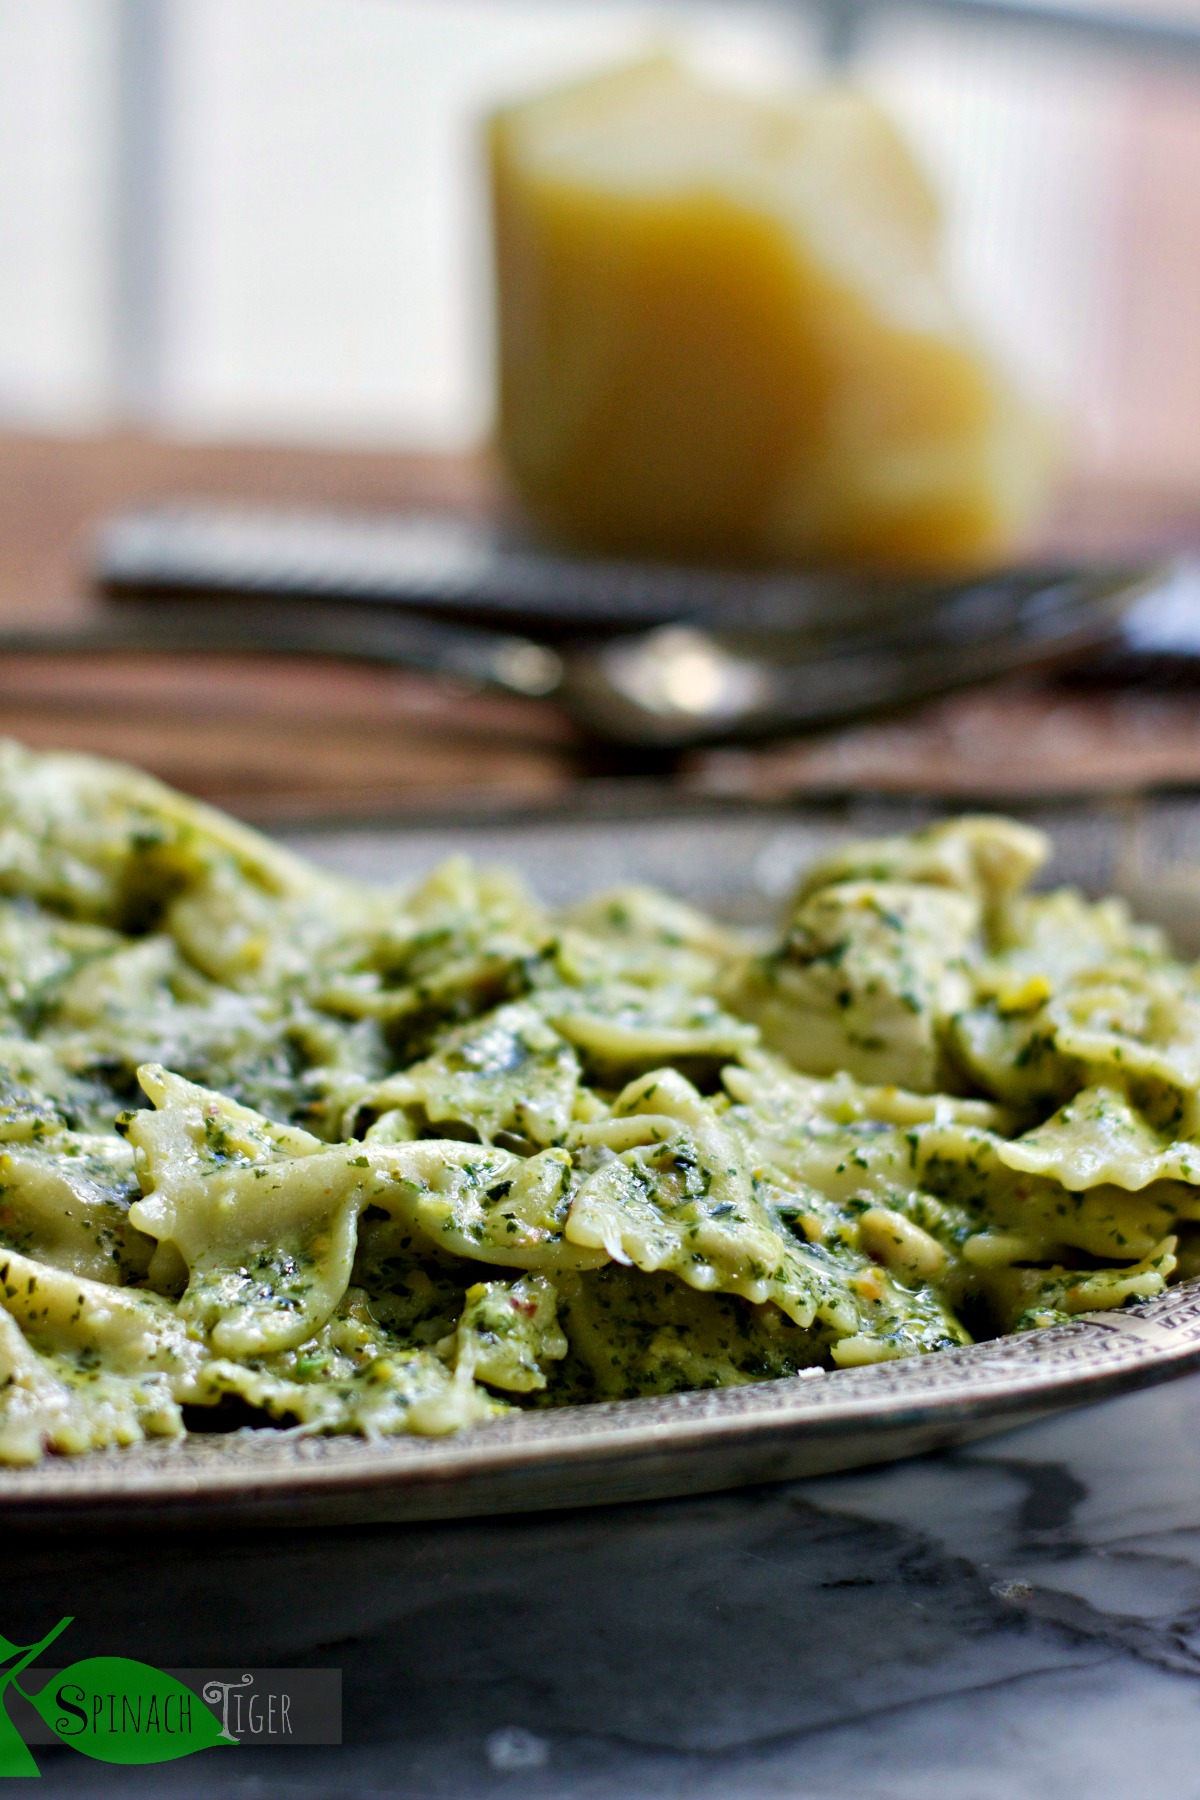 How to Make Italian Chicken Pasta Recipe with Pesto from Spinach Tiger